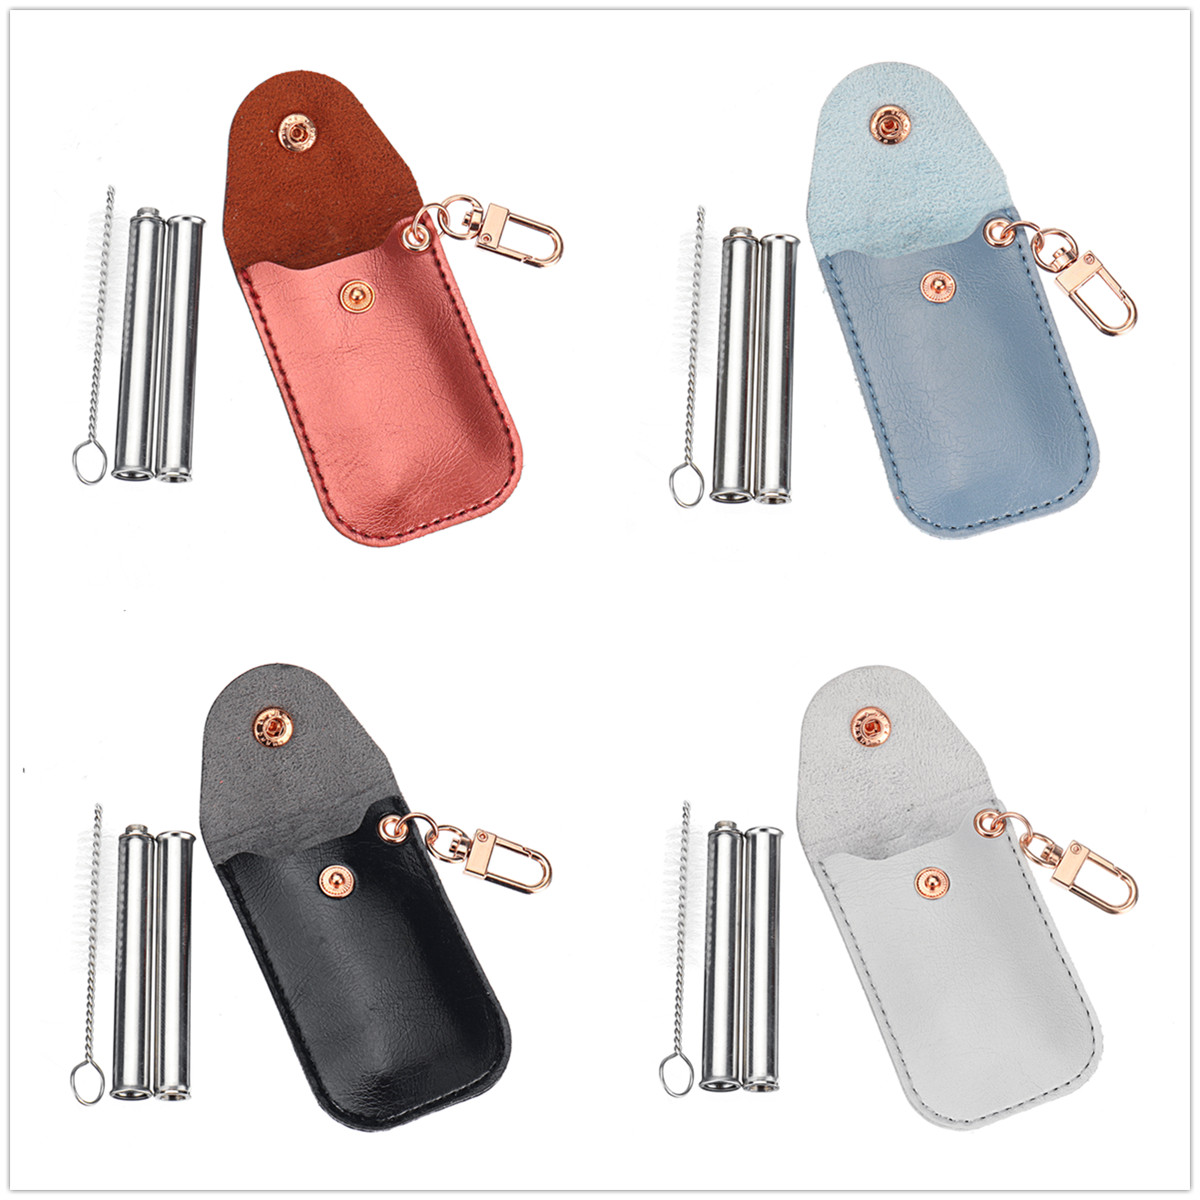 

Portable Reusable Stainless Steel Reusable Foldable Drinking Straws + PU Leather Storage Case + Cleaning Brush